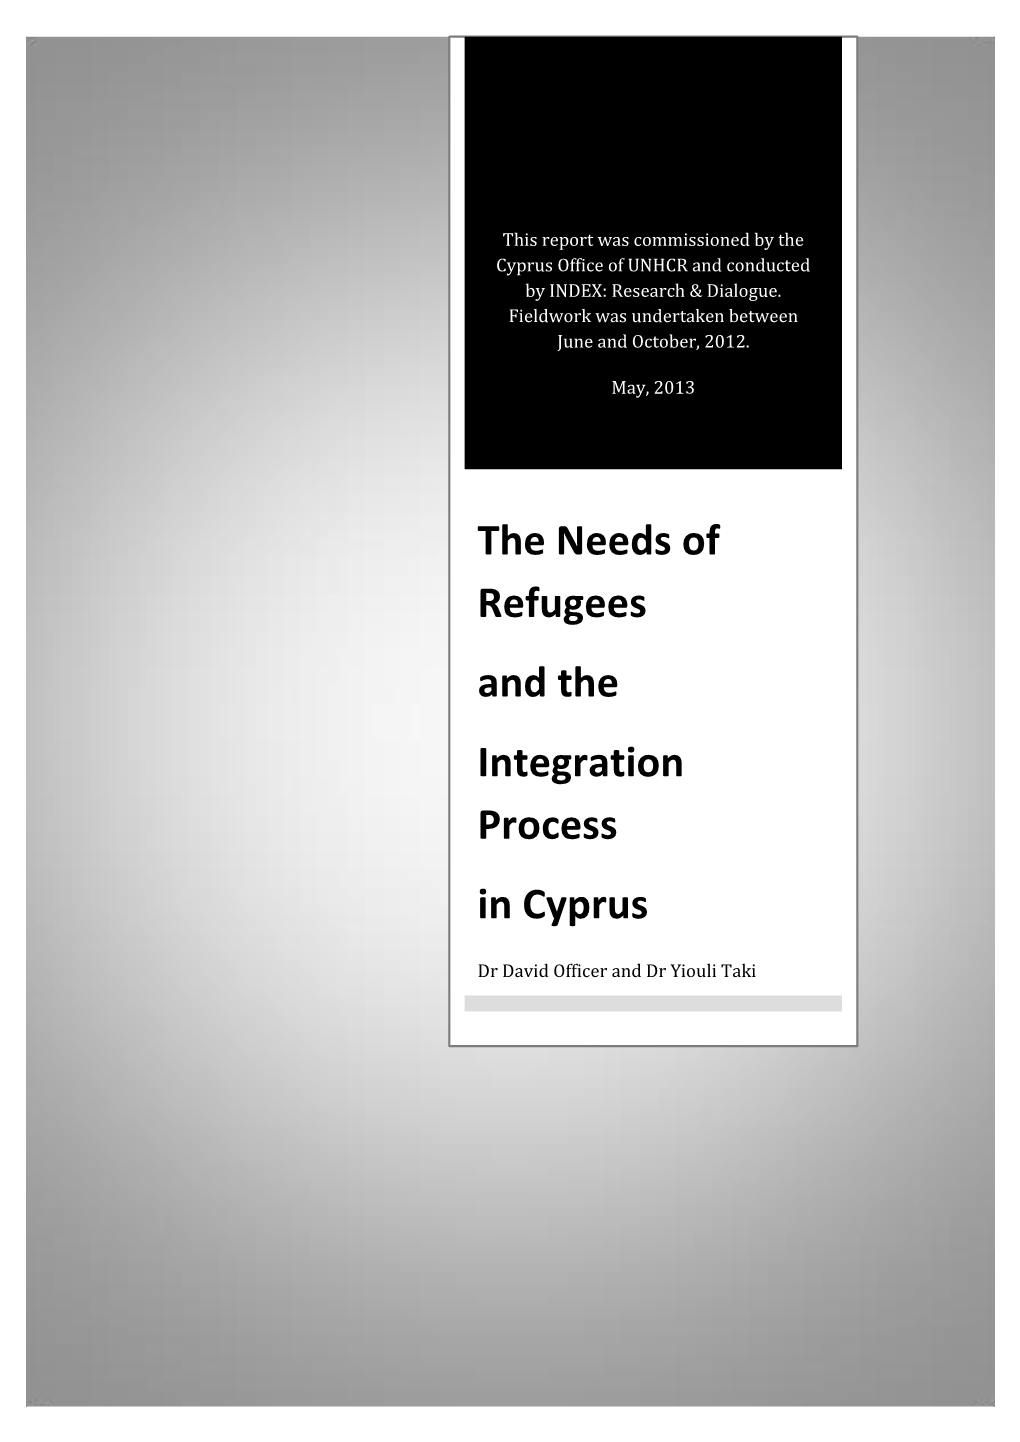 The Needs of Refugees and the Integration Process in Cyprus